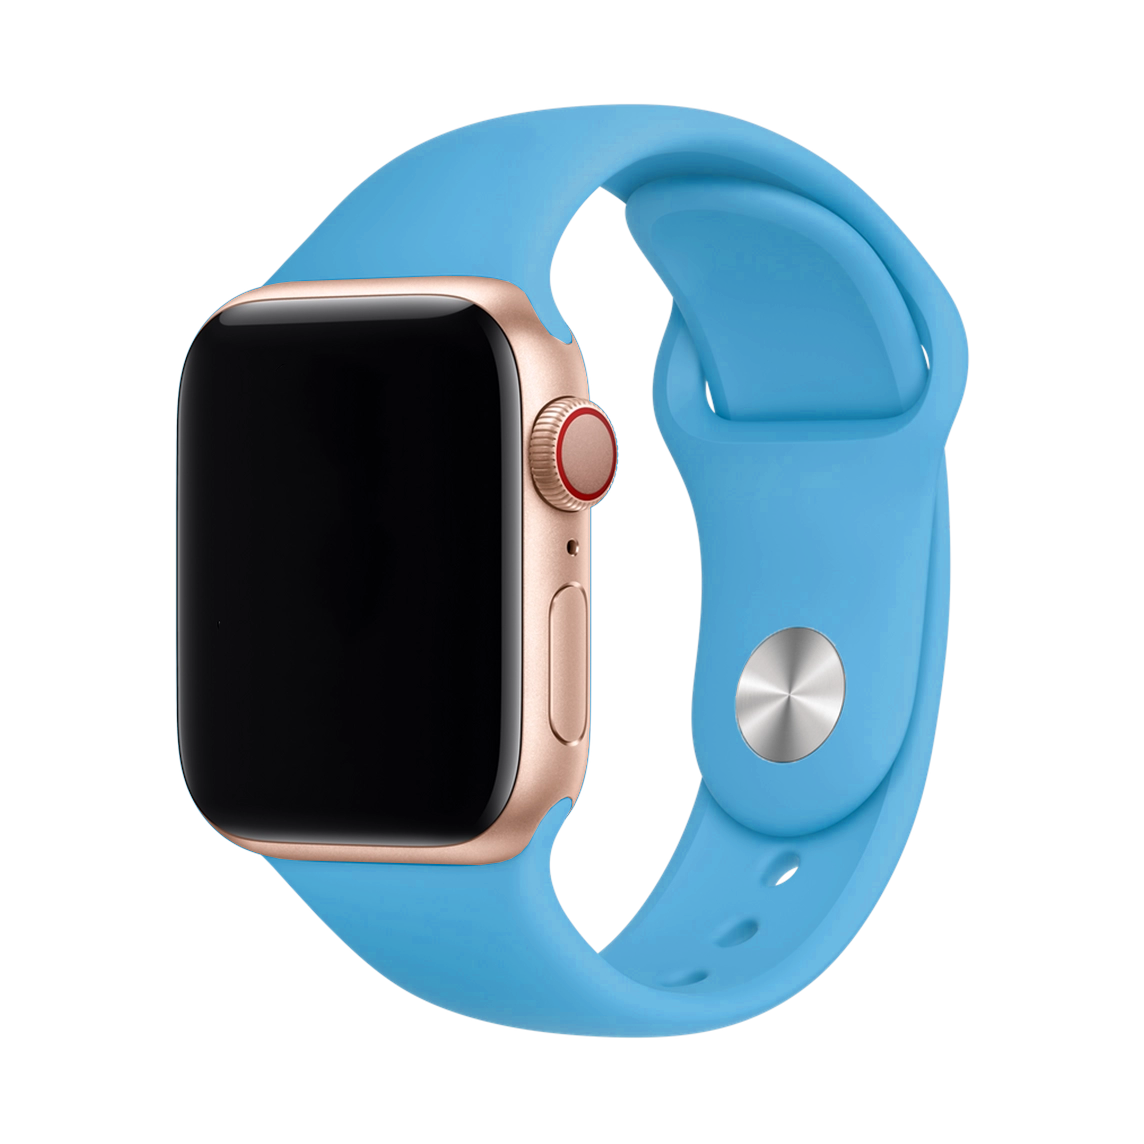 apple-watch-se-space-gray-aluminum-case-with-midnight-sport-band